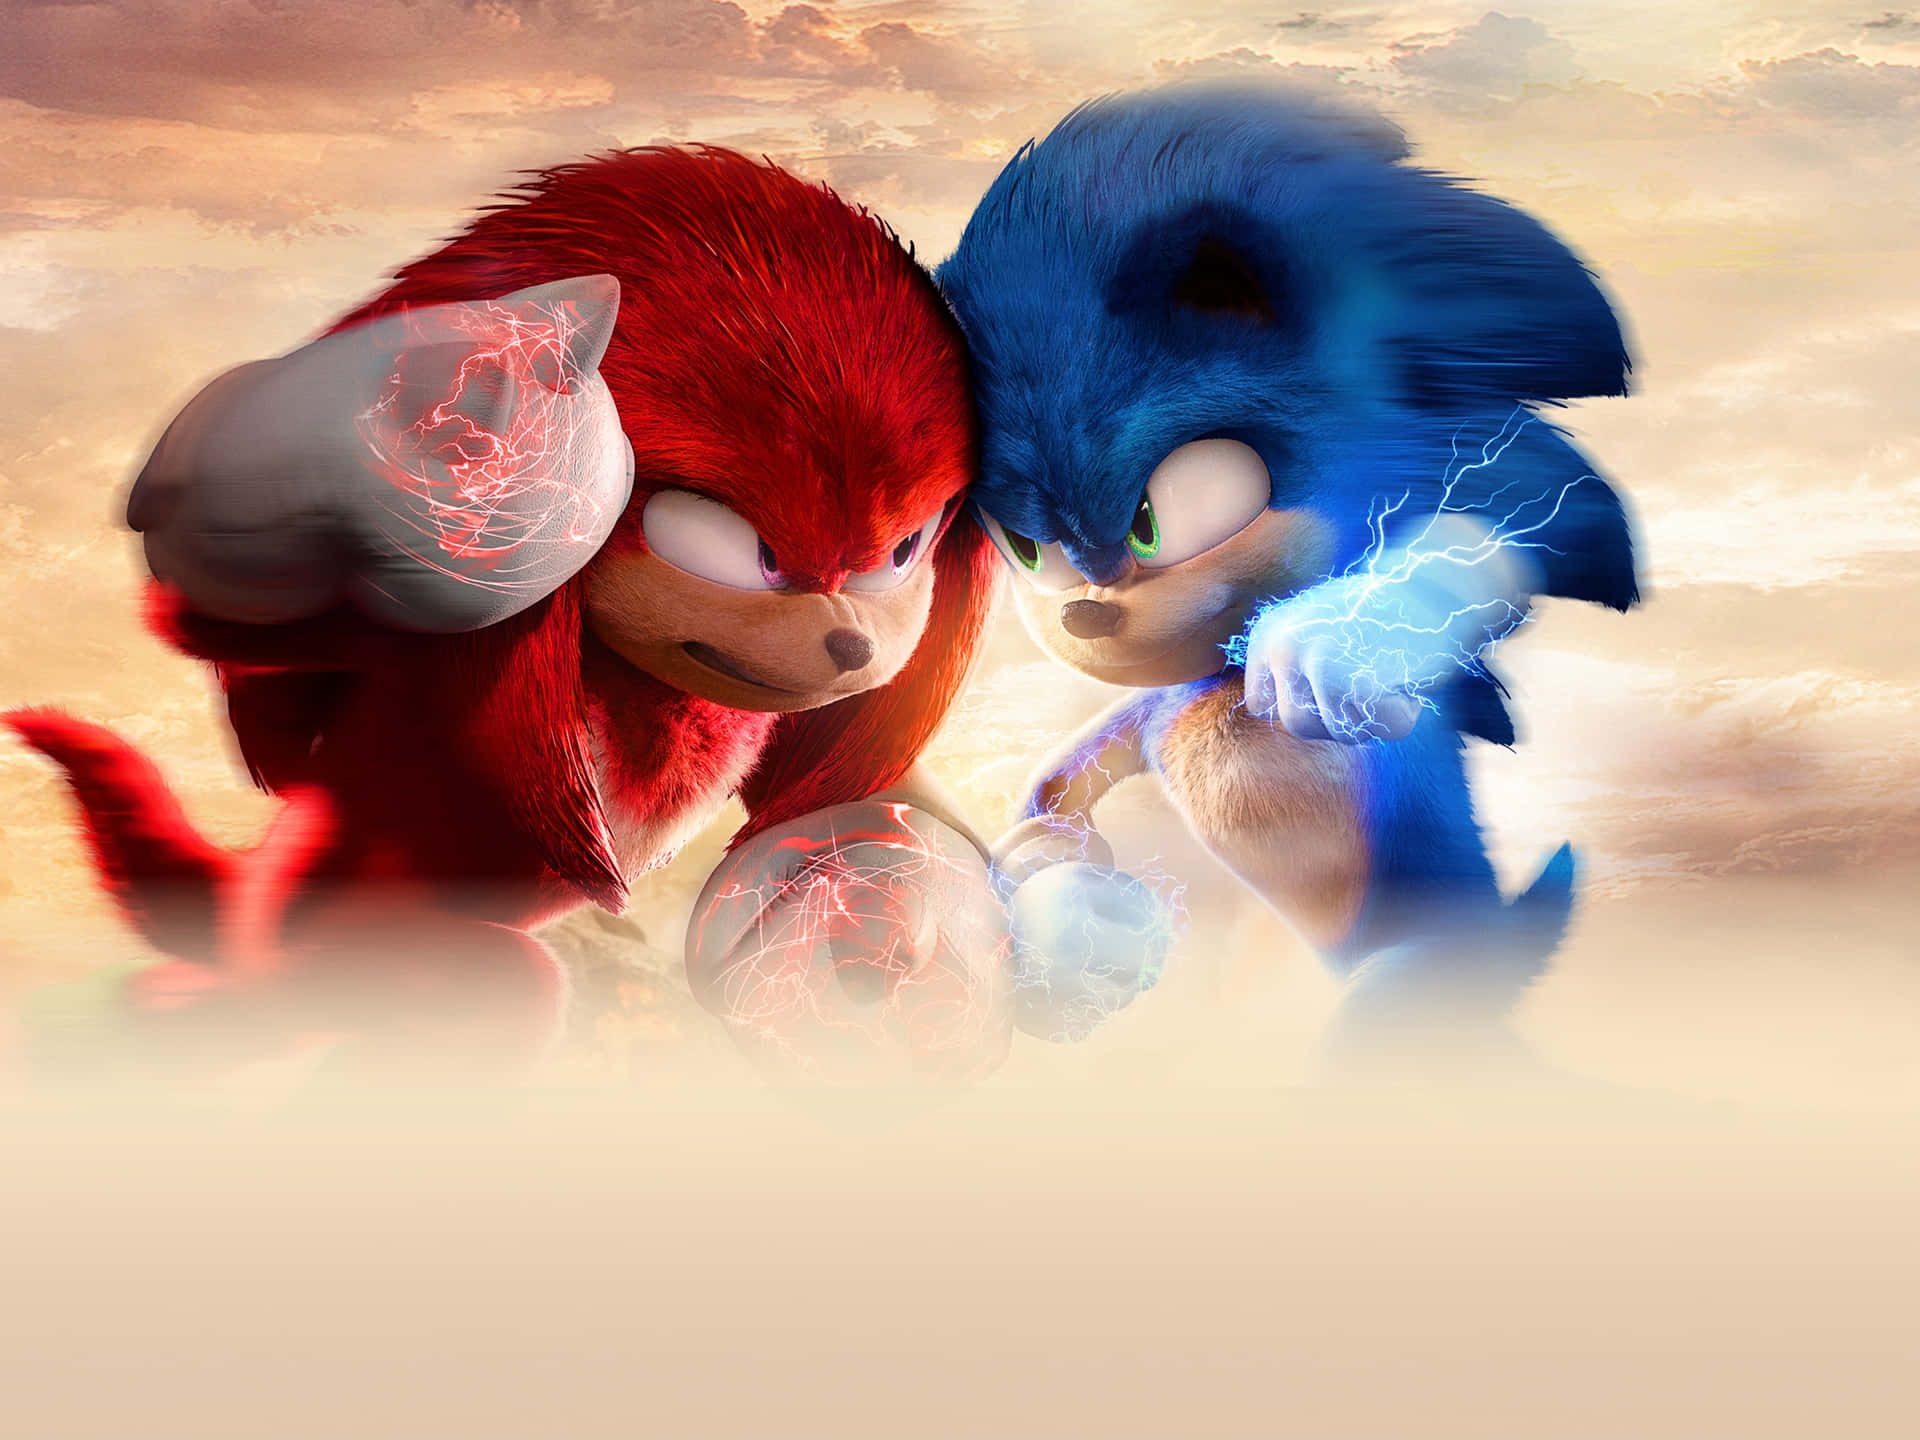 Knuckles the Echidna from the Sonic the Hedgehog Universe Wallpaper